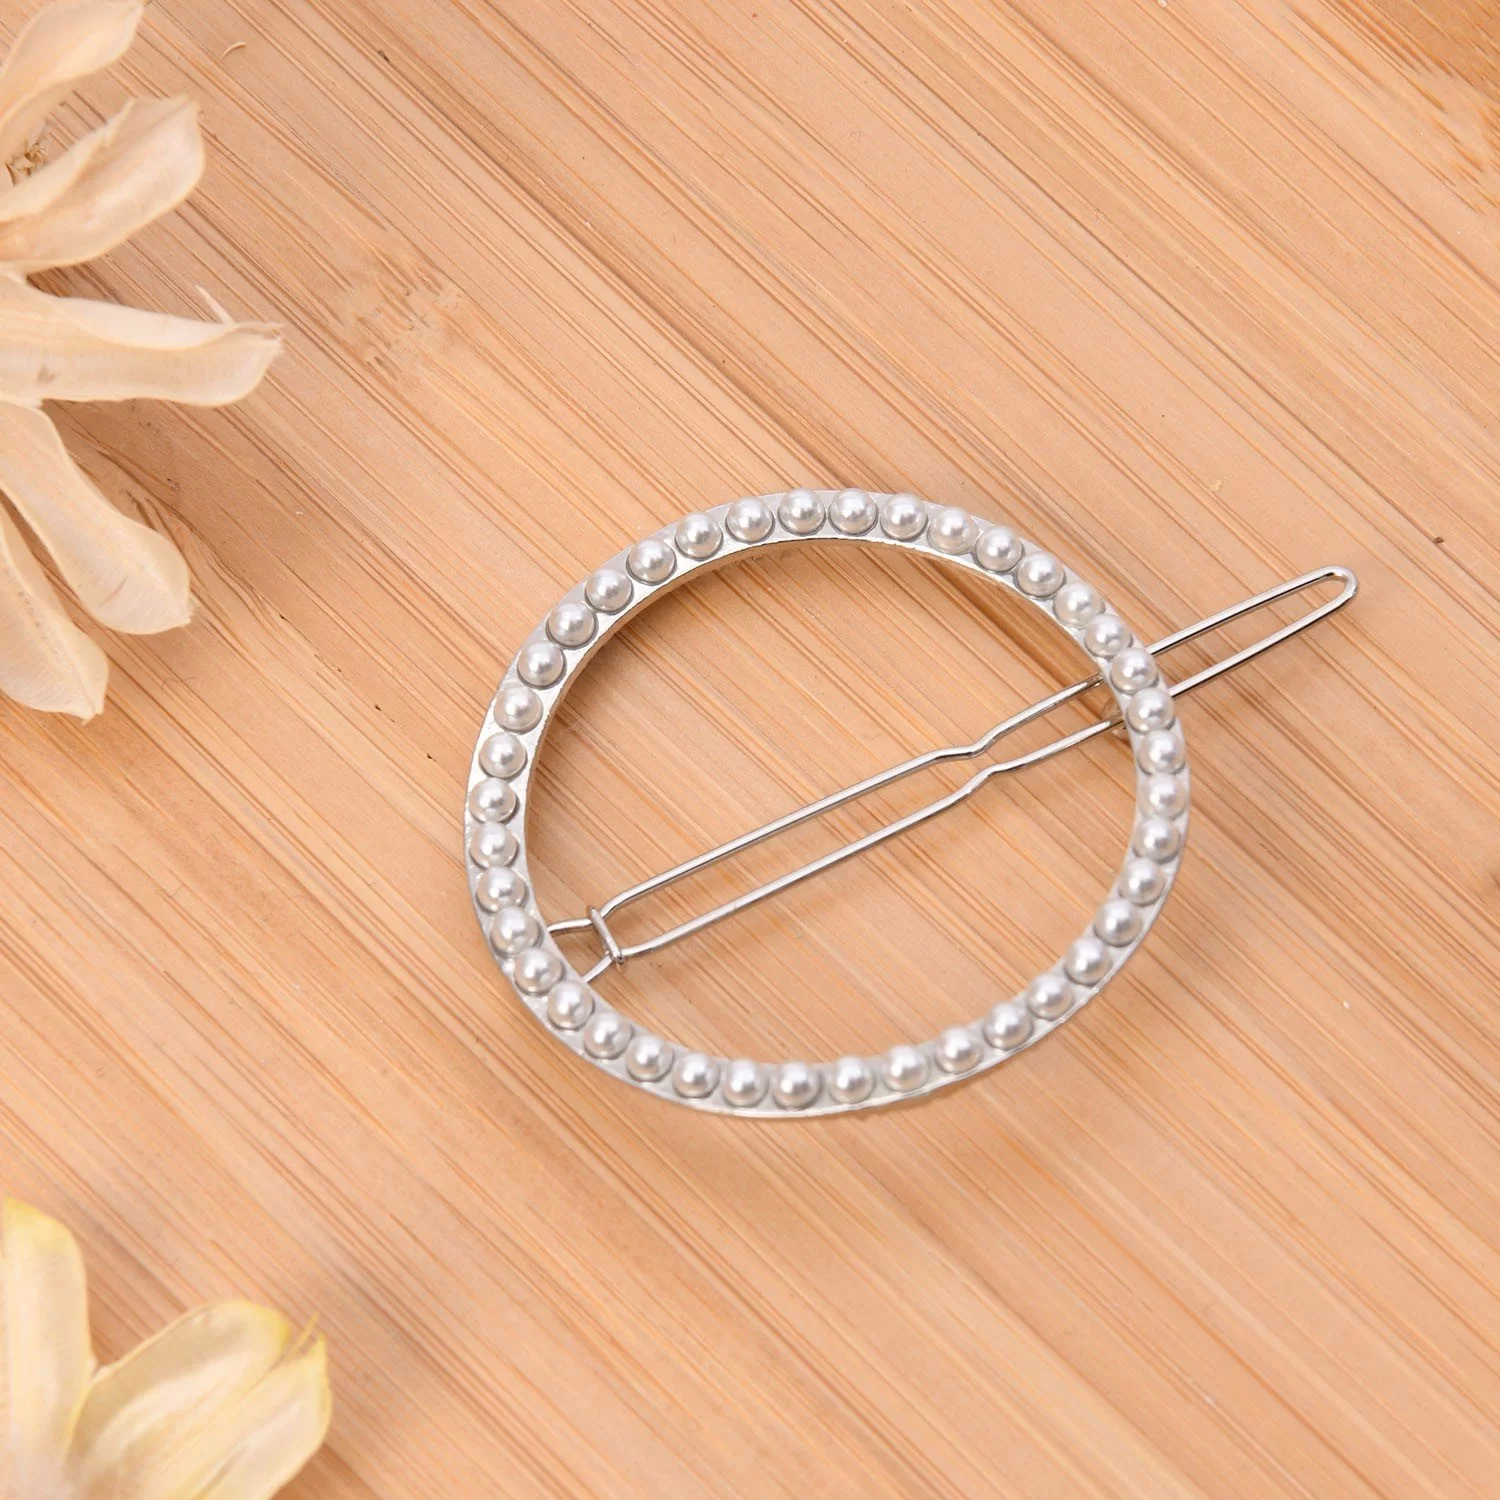 Hair Clip Round Shape Pearl Metal Gold Silver Color Design Daily Fashion  Beauty Use Hair Clip For Girl And Women Length 6cm